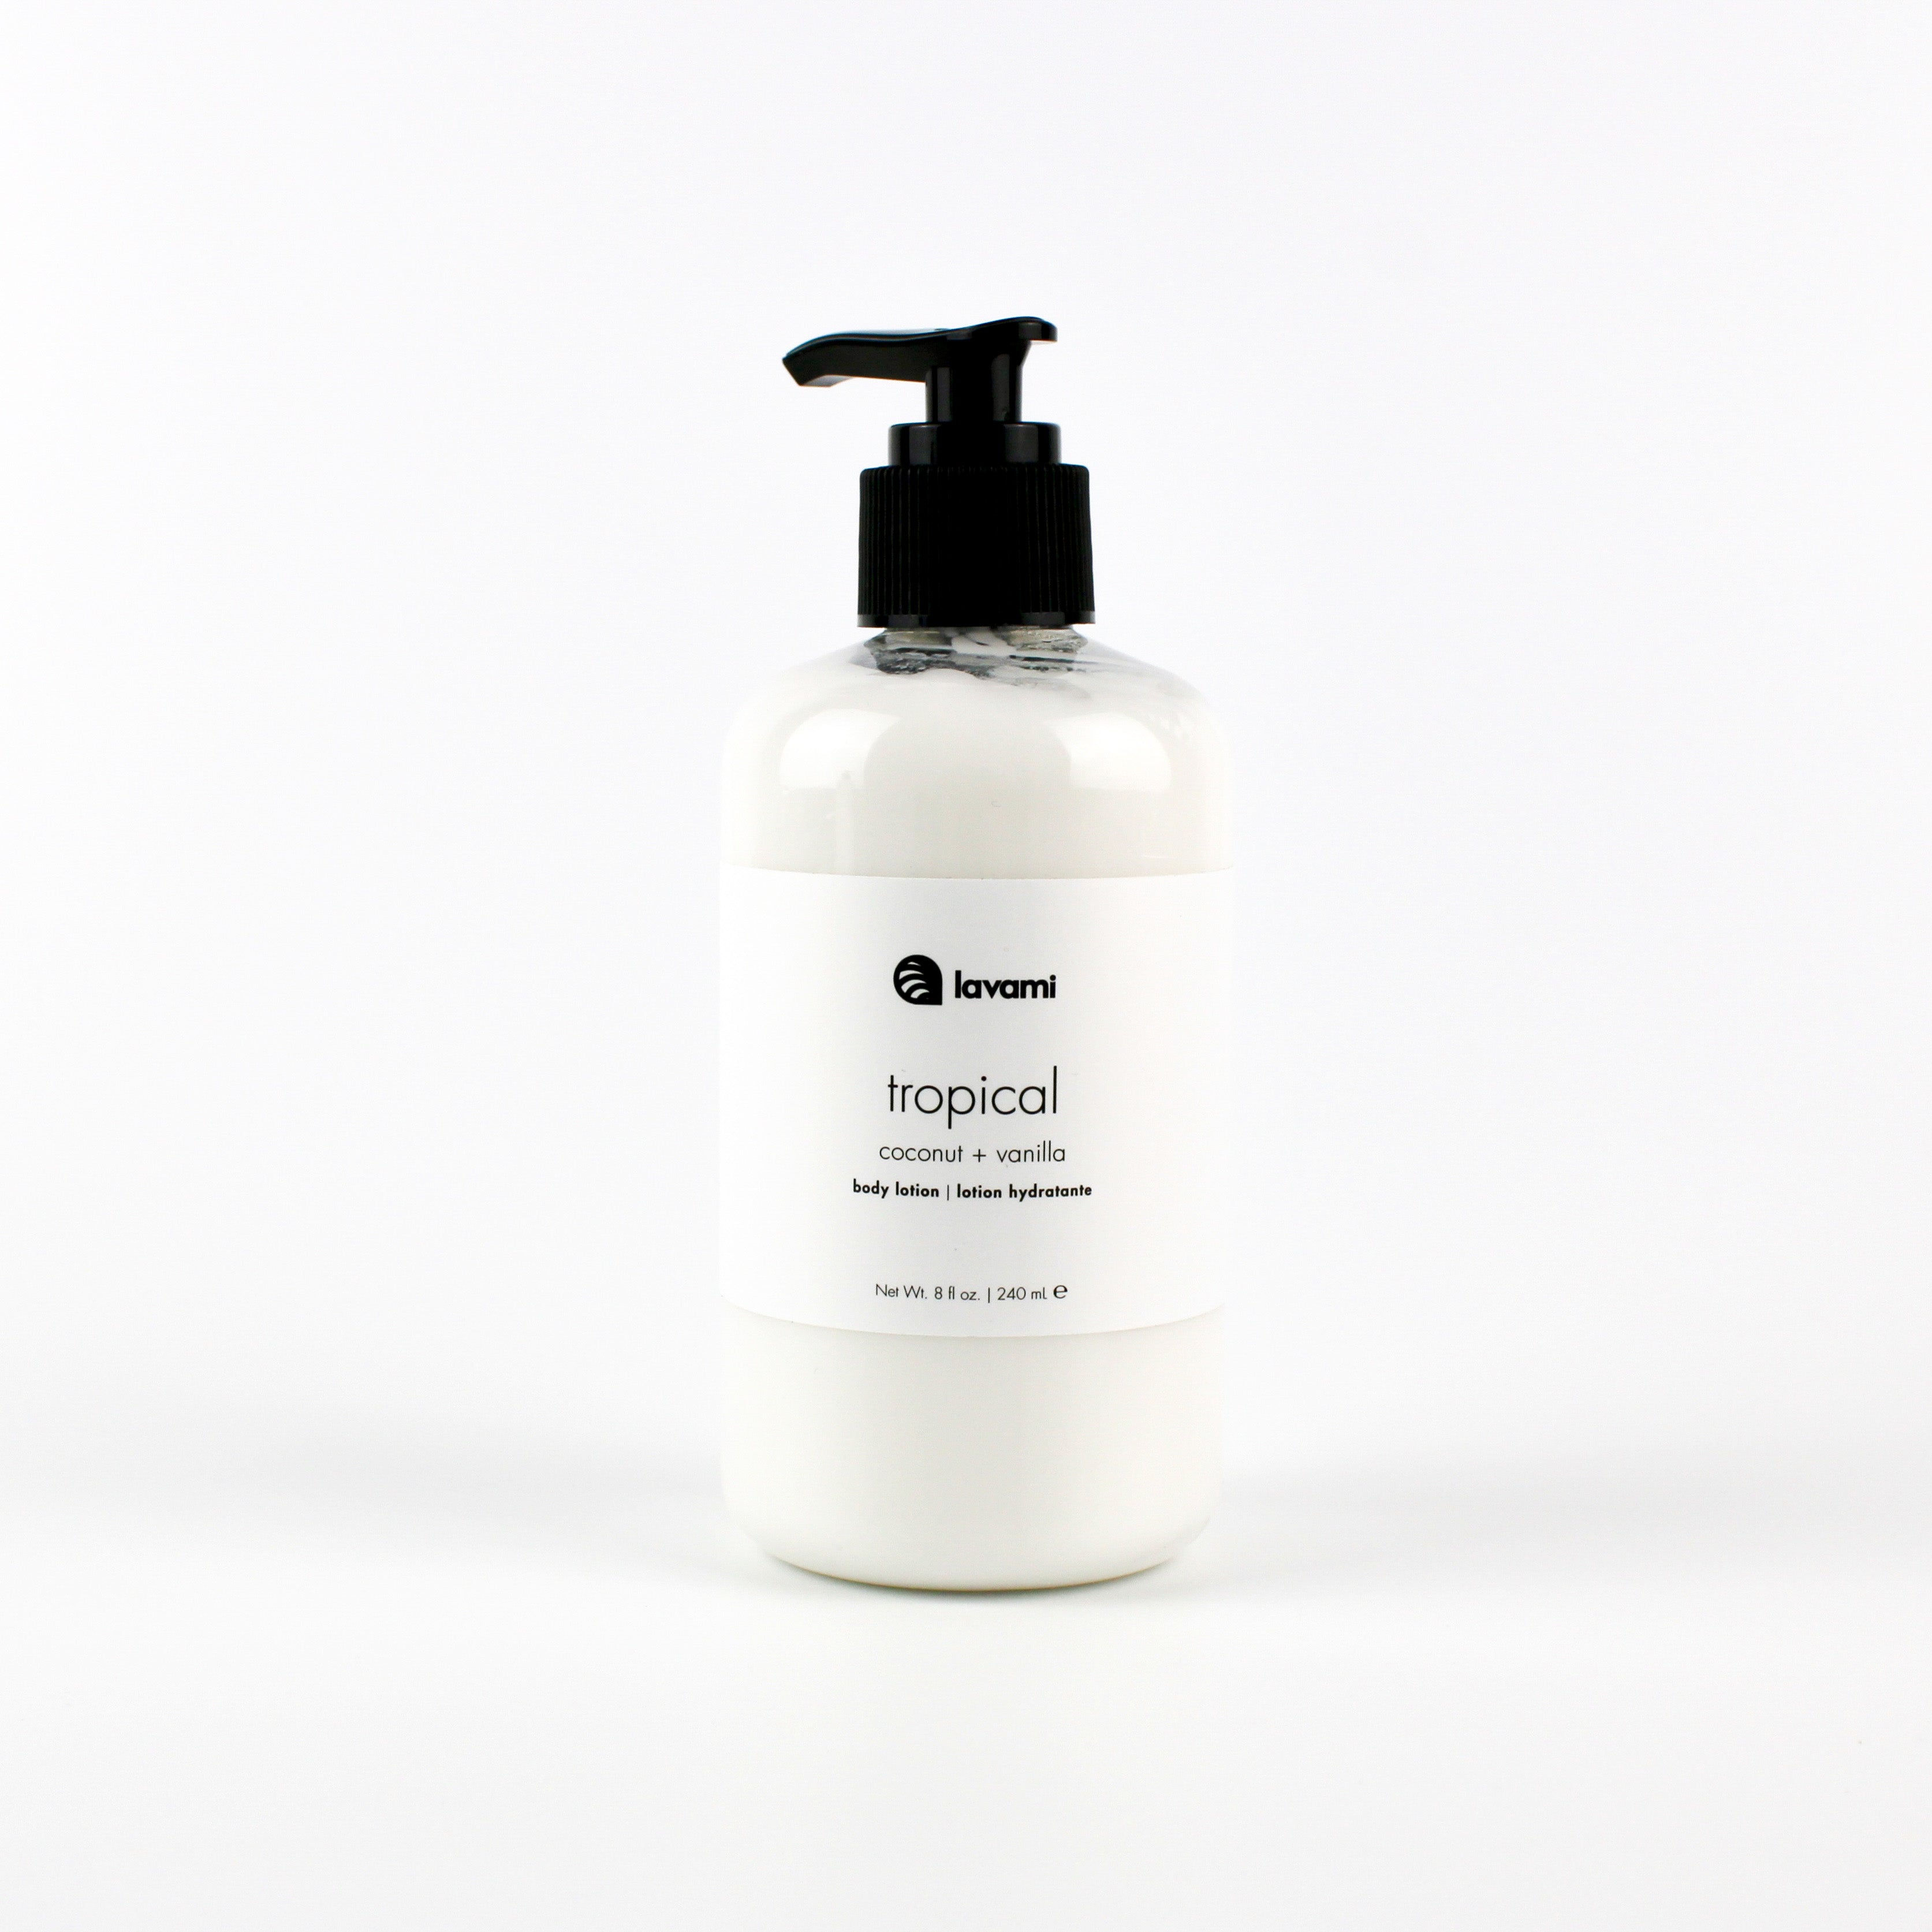 Hydrating and lightweight vanilla and coconut body lotion with a probiotic preservative.